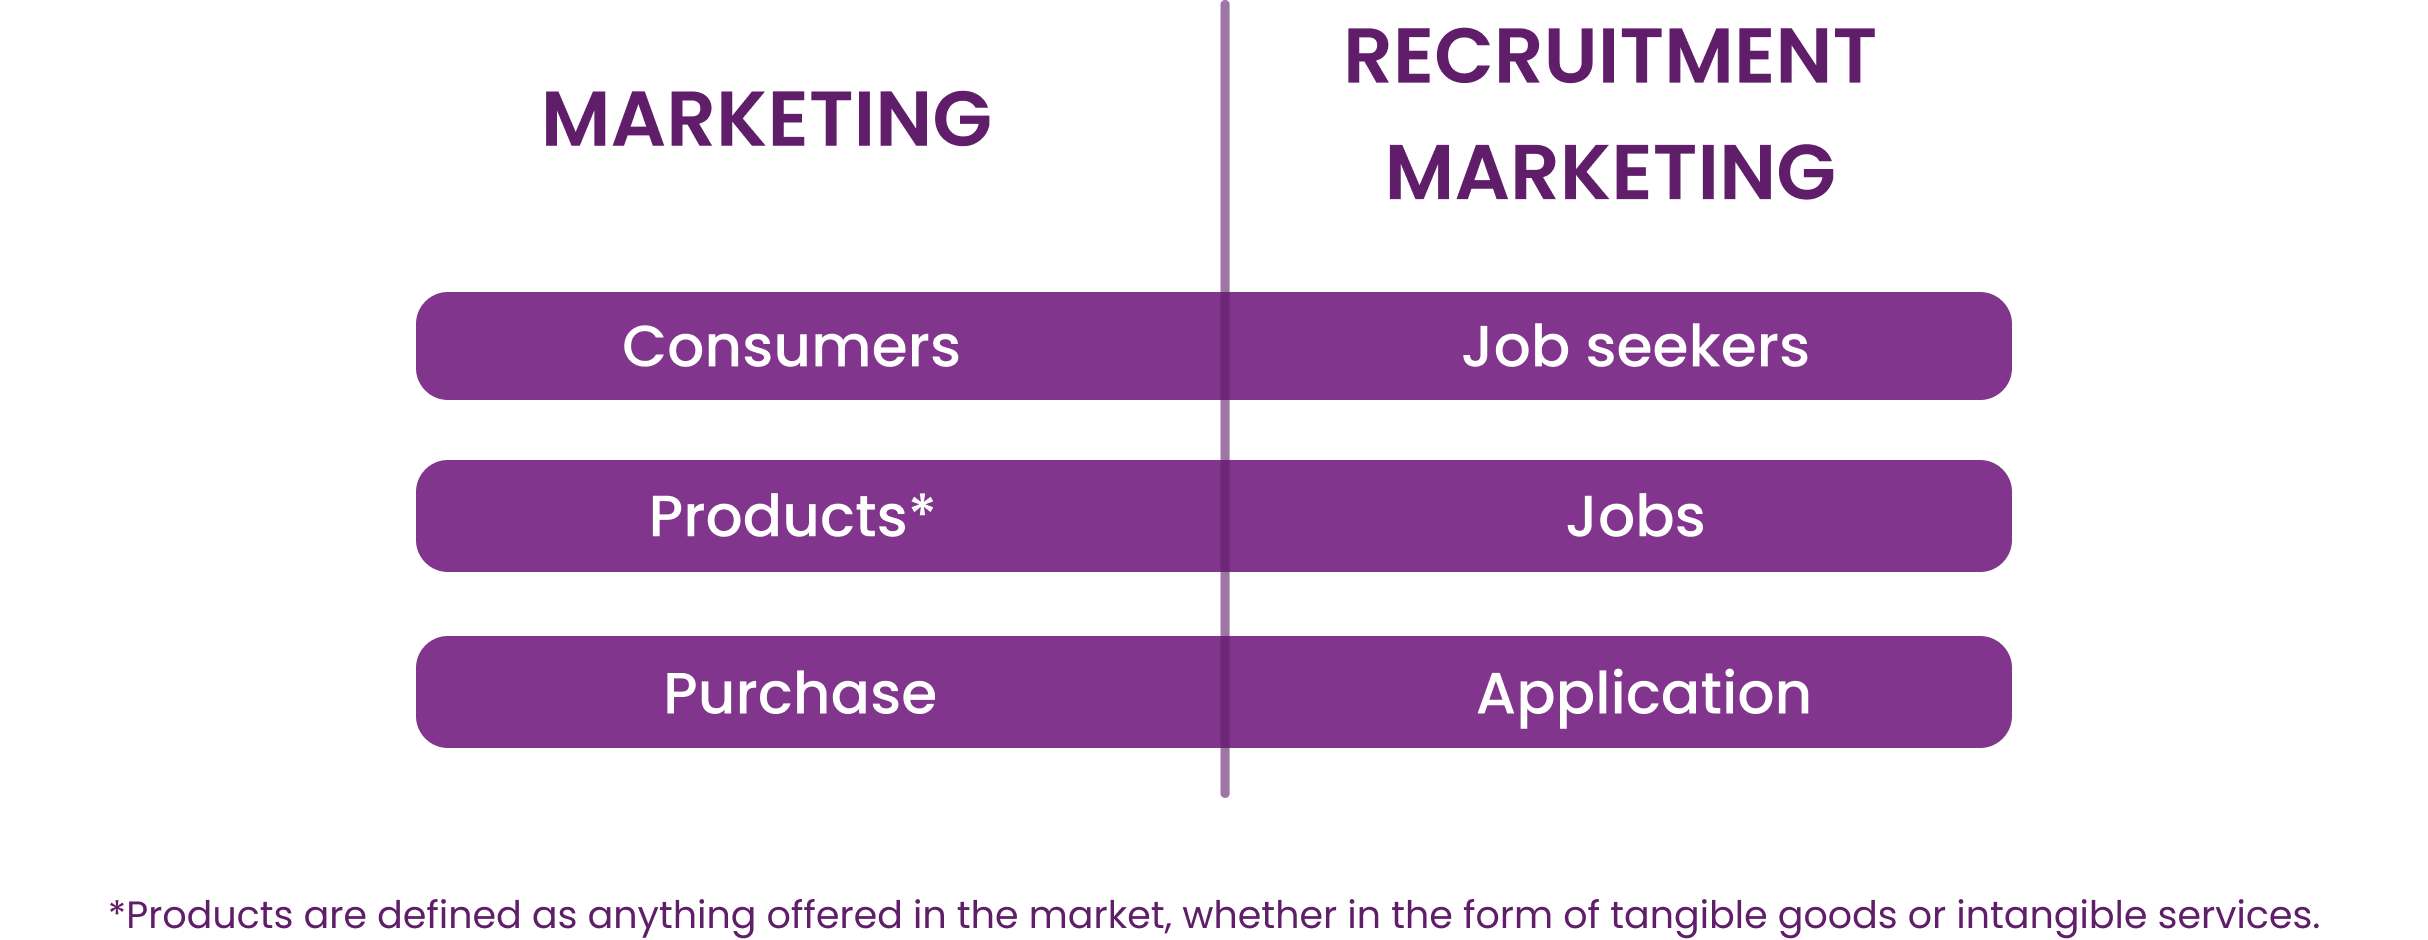 Illustration depicting the differences between marketing and recruitment marketing